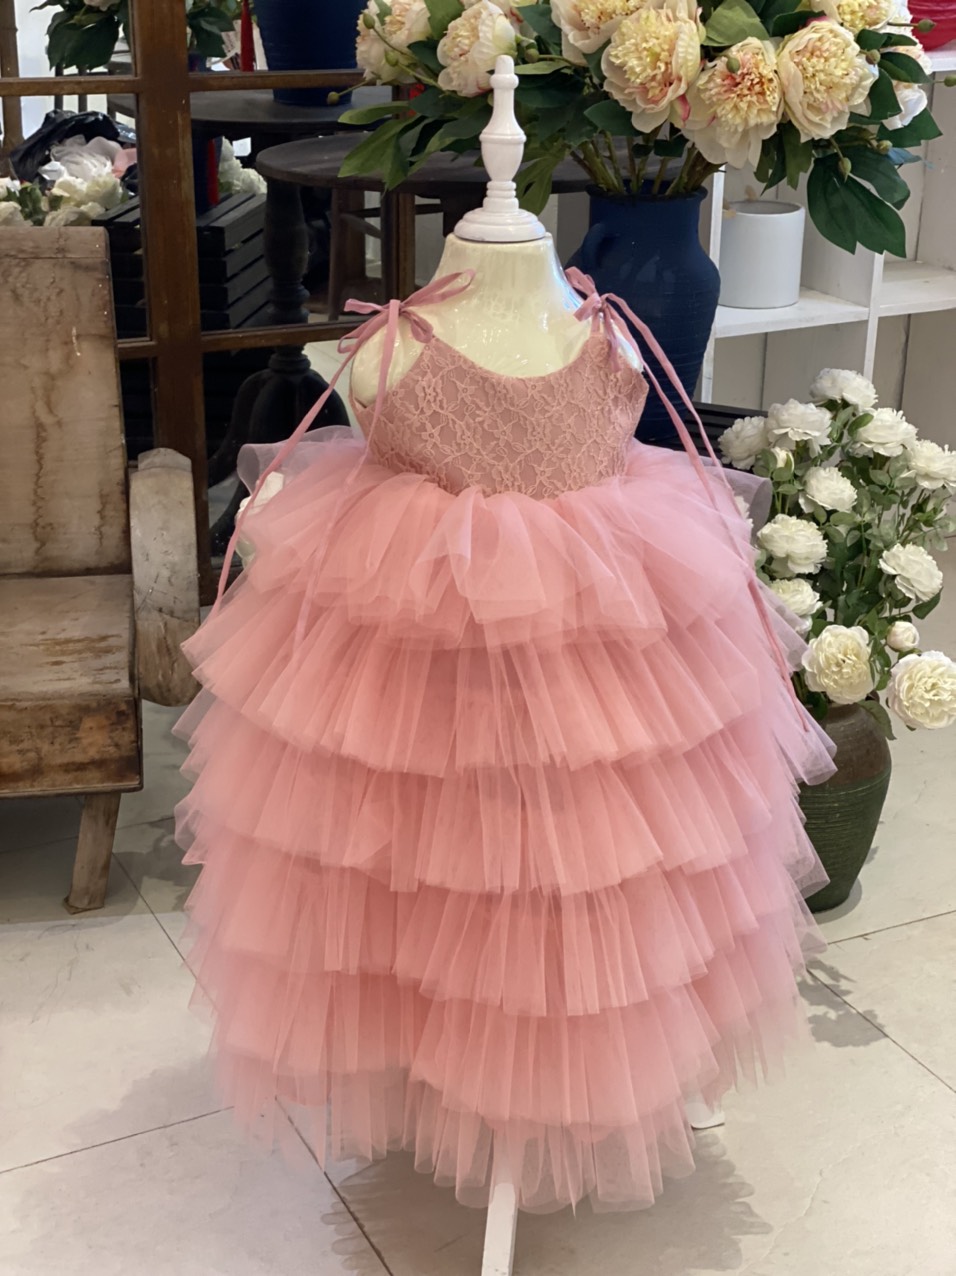 9 - Layer Luxury Princess Dresses Variety Beautiful Color using for Baby Girl Pack In Plastic Bag Hot Selling Made in Vietnam Manufacturer 5